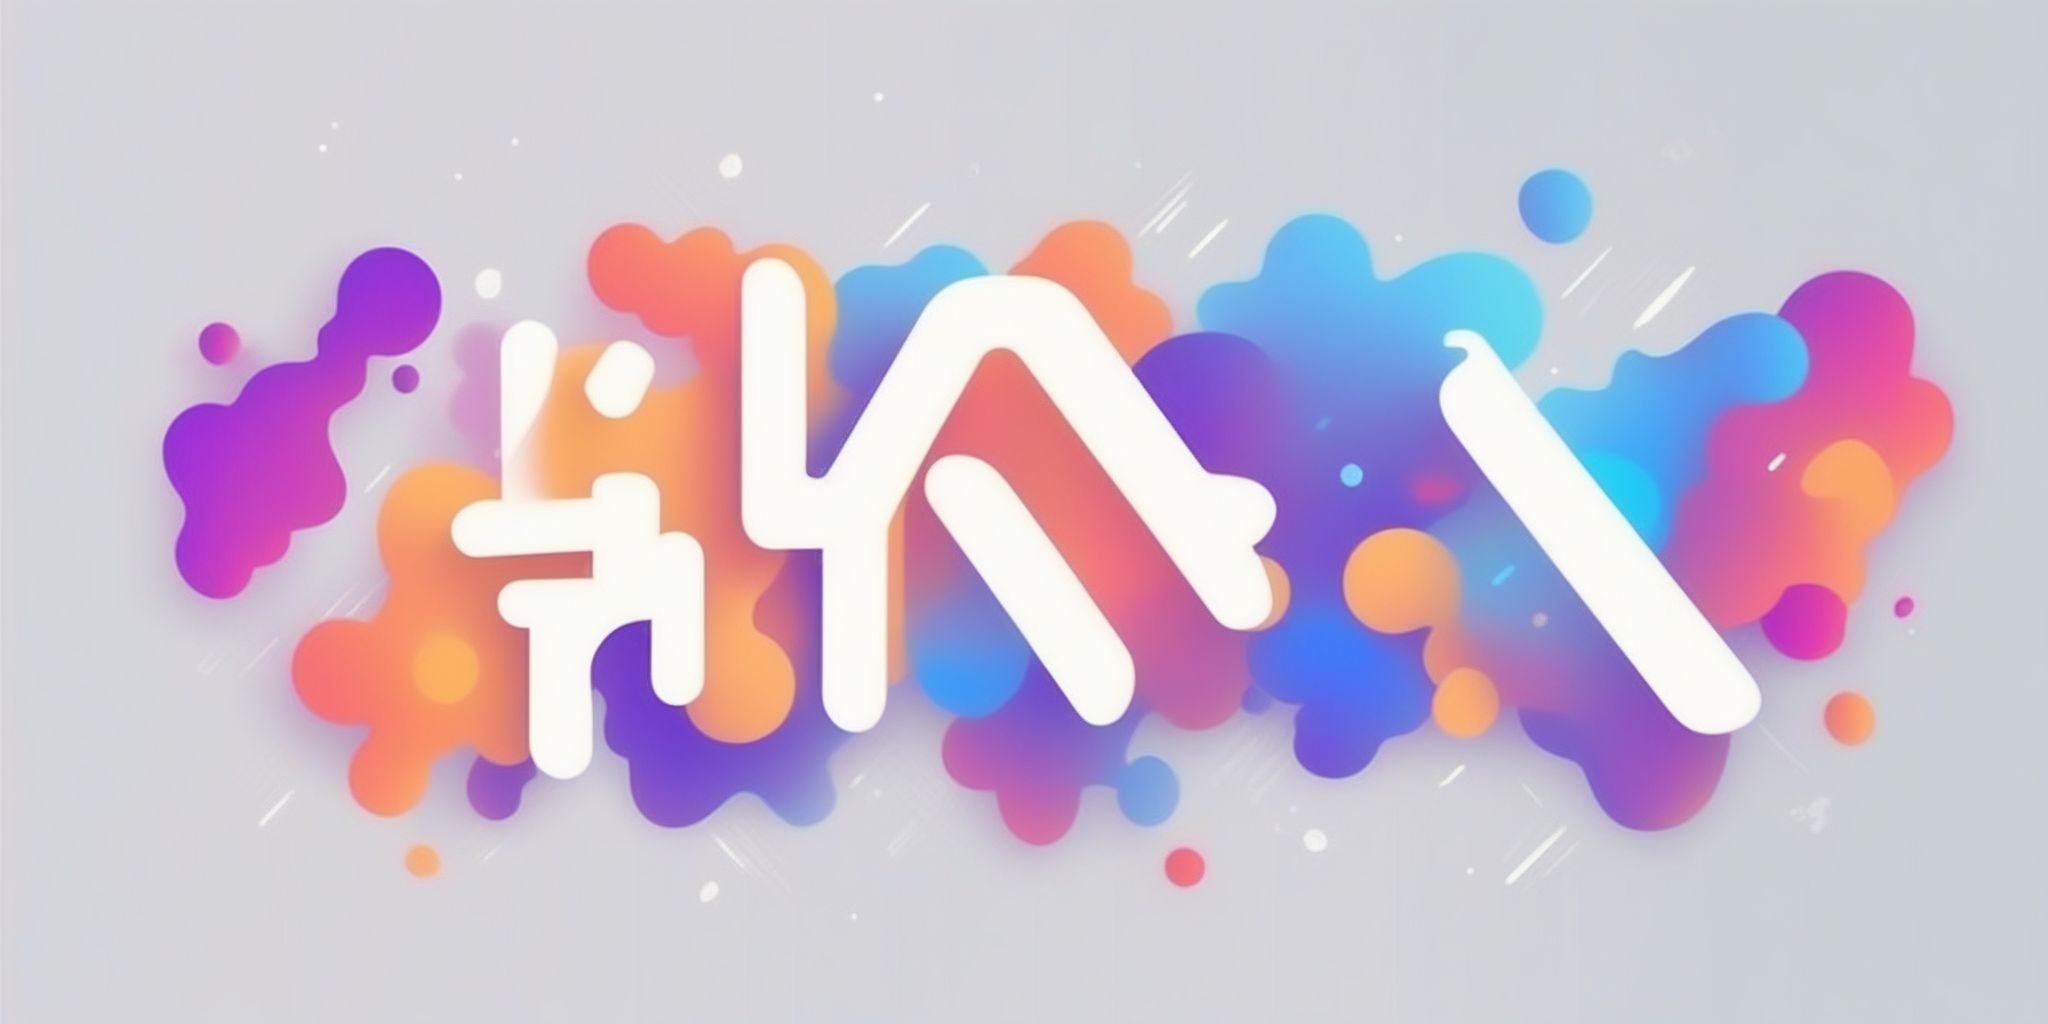 hashtag in illustration style with gradients and white background